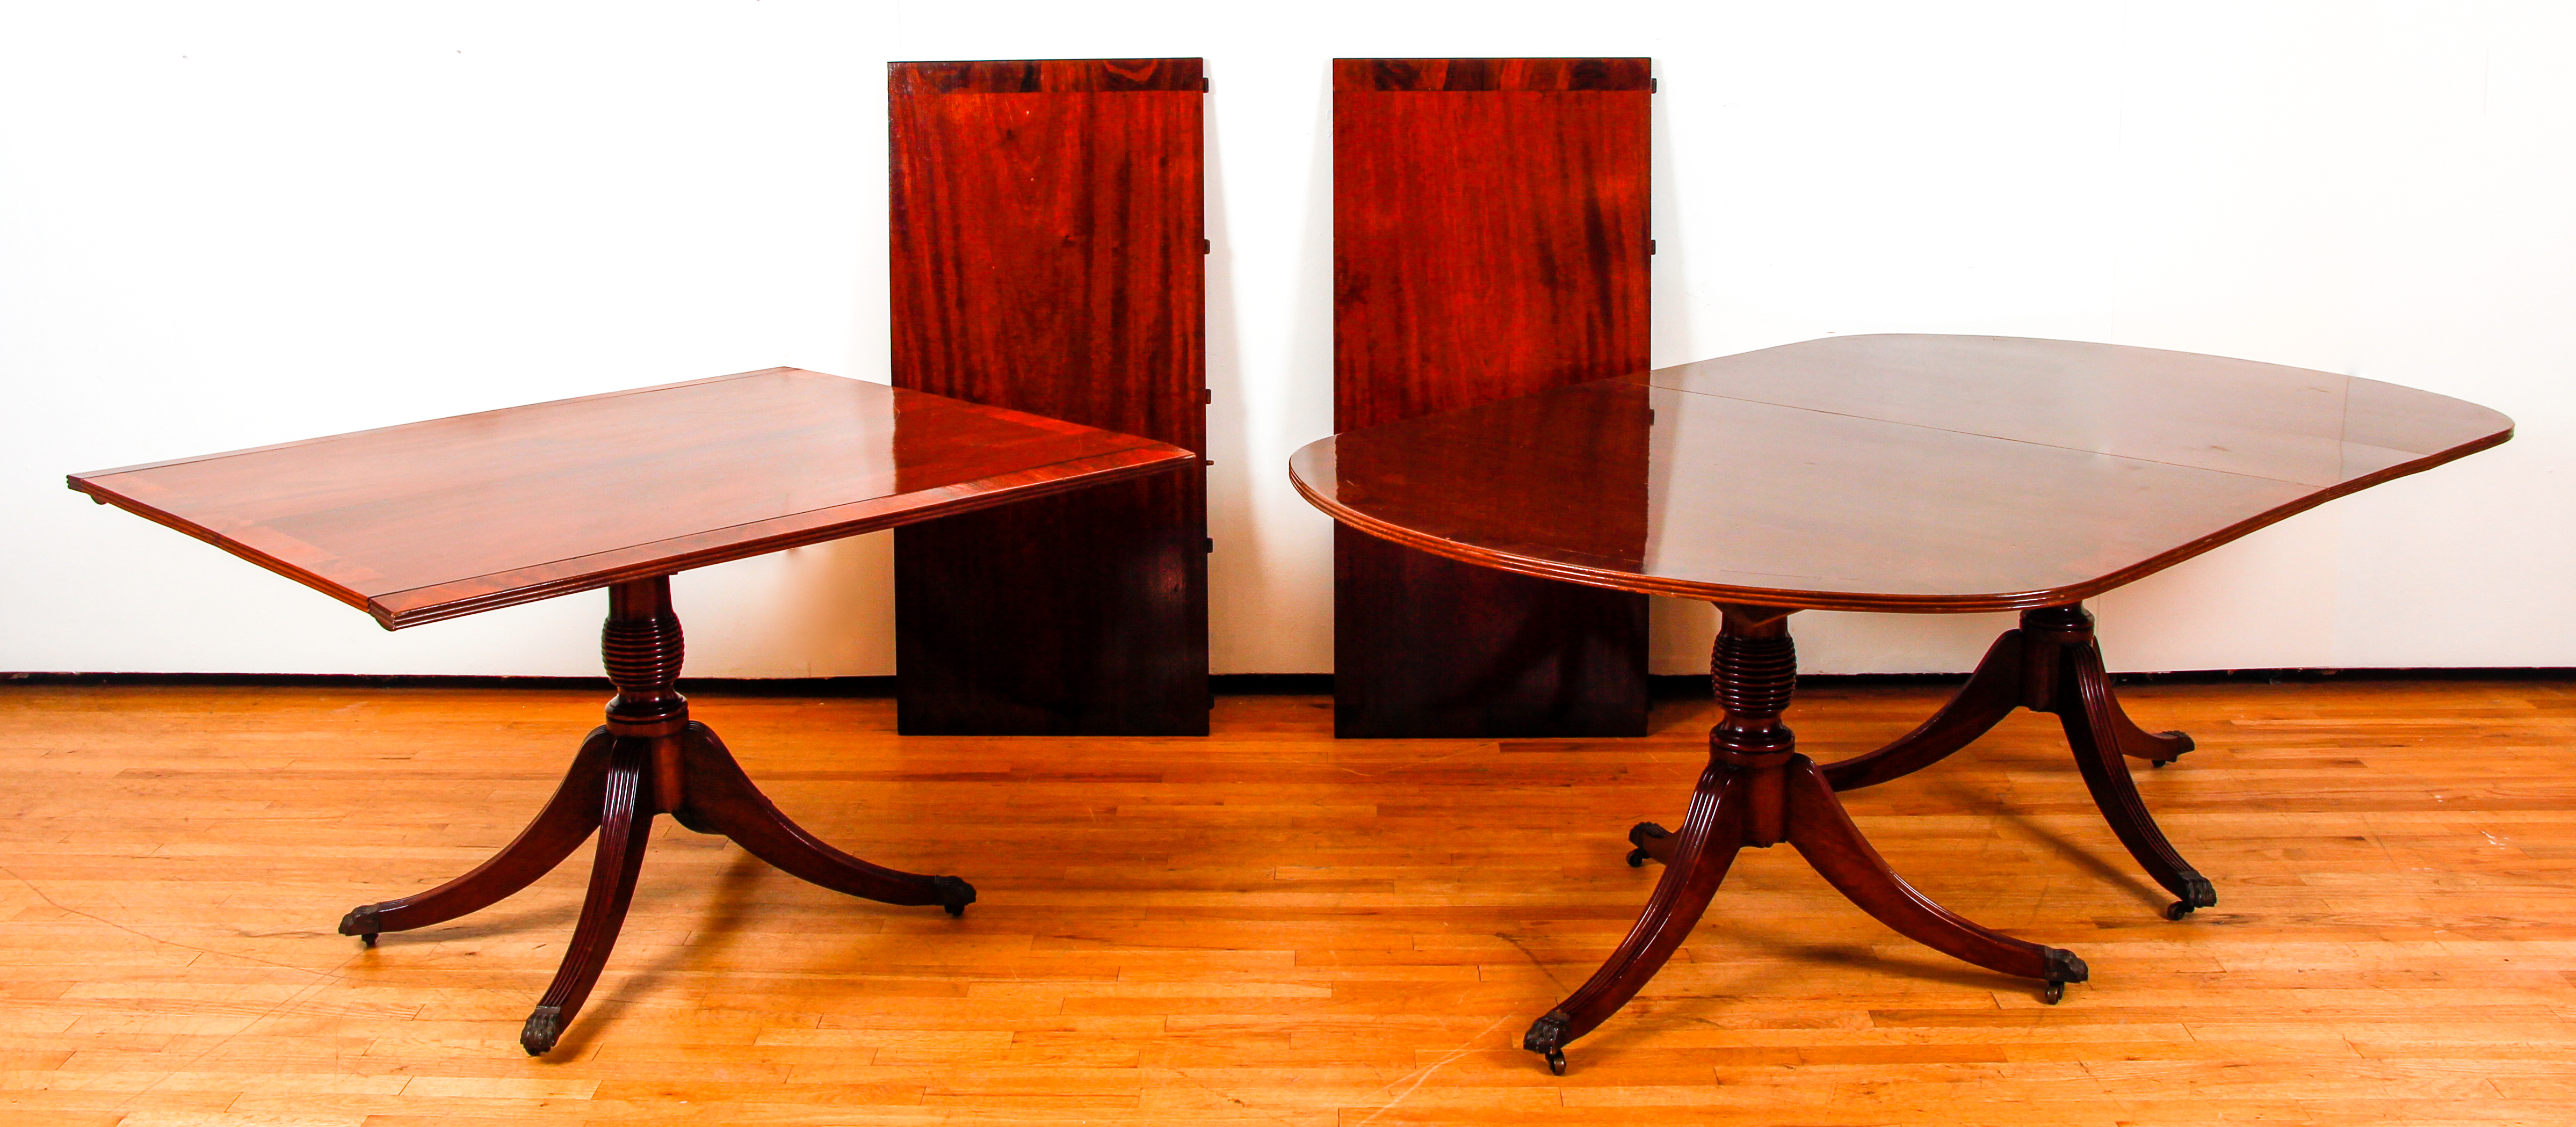 Duncan Phyfe Style triple pedestal dining table - Image 3 of 8